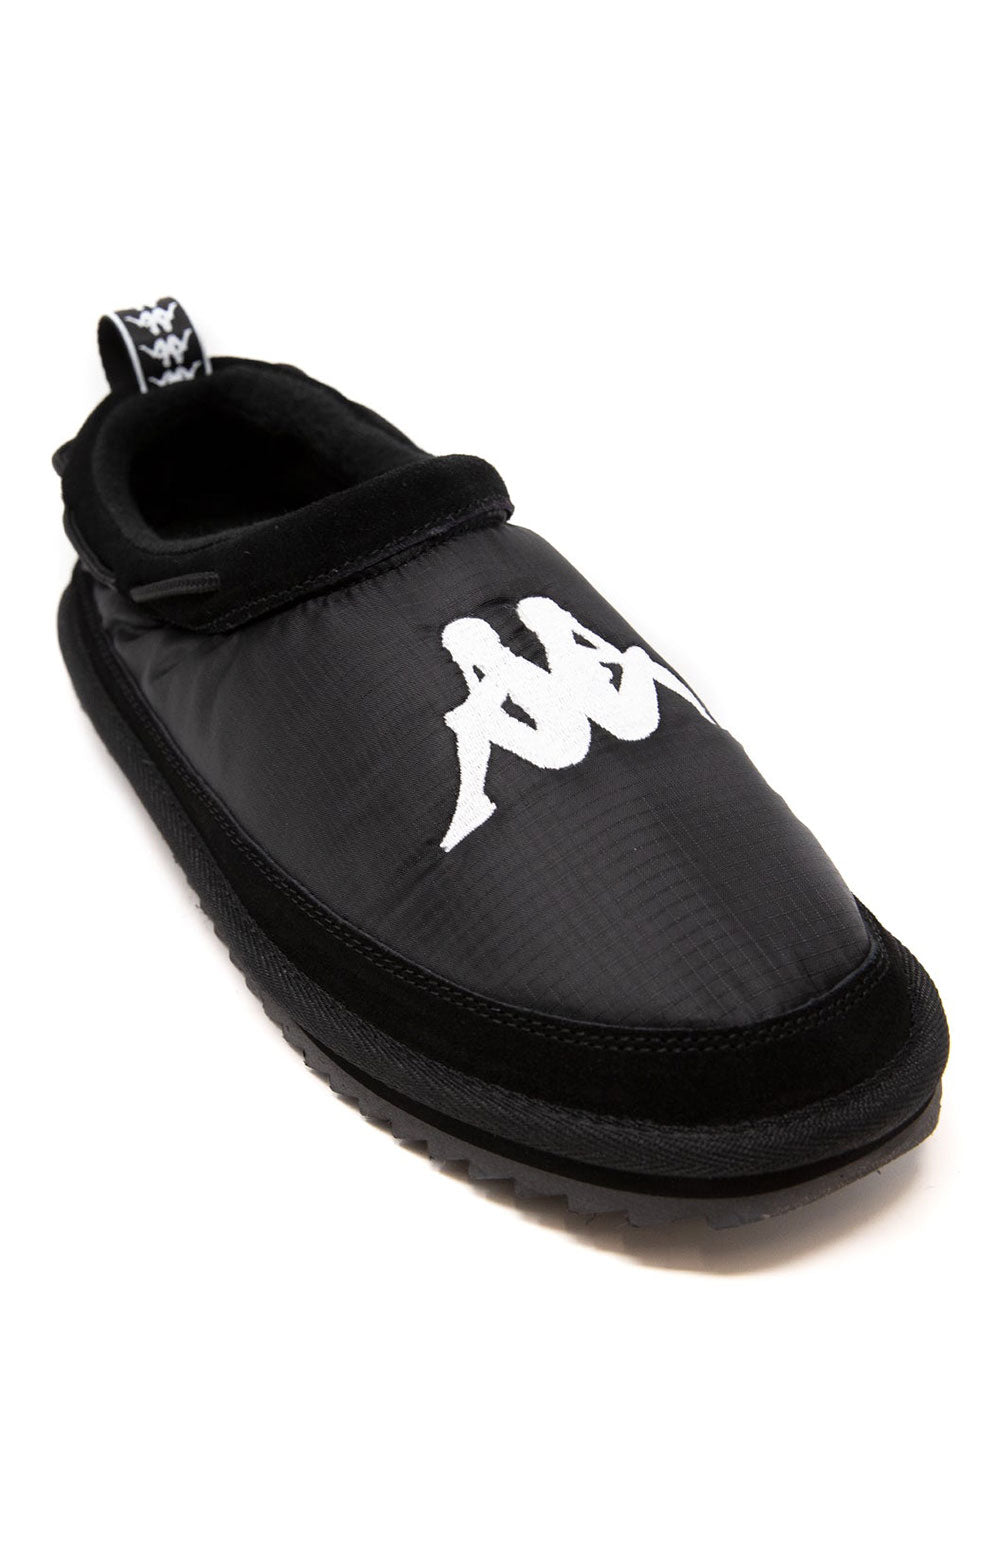 (351859W) Authentic Mule 3 Slippers - Black/White